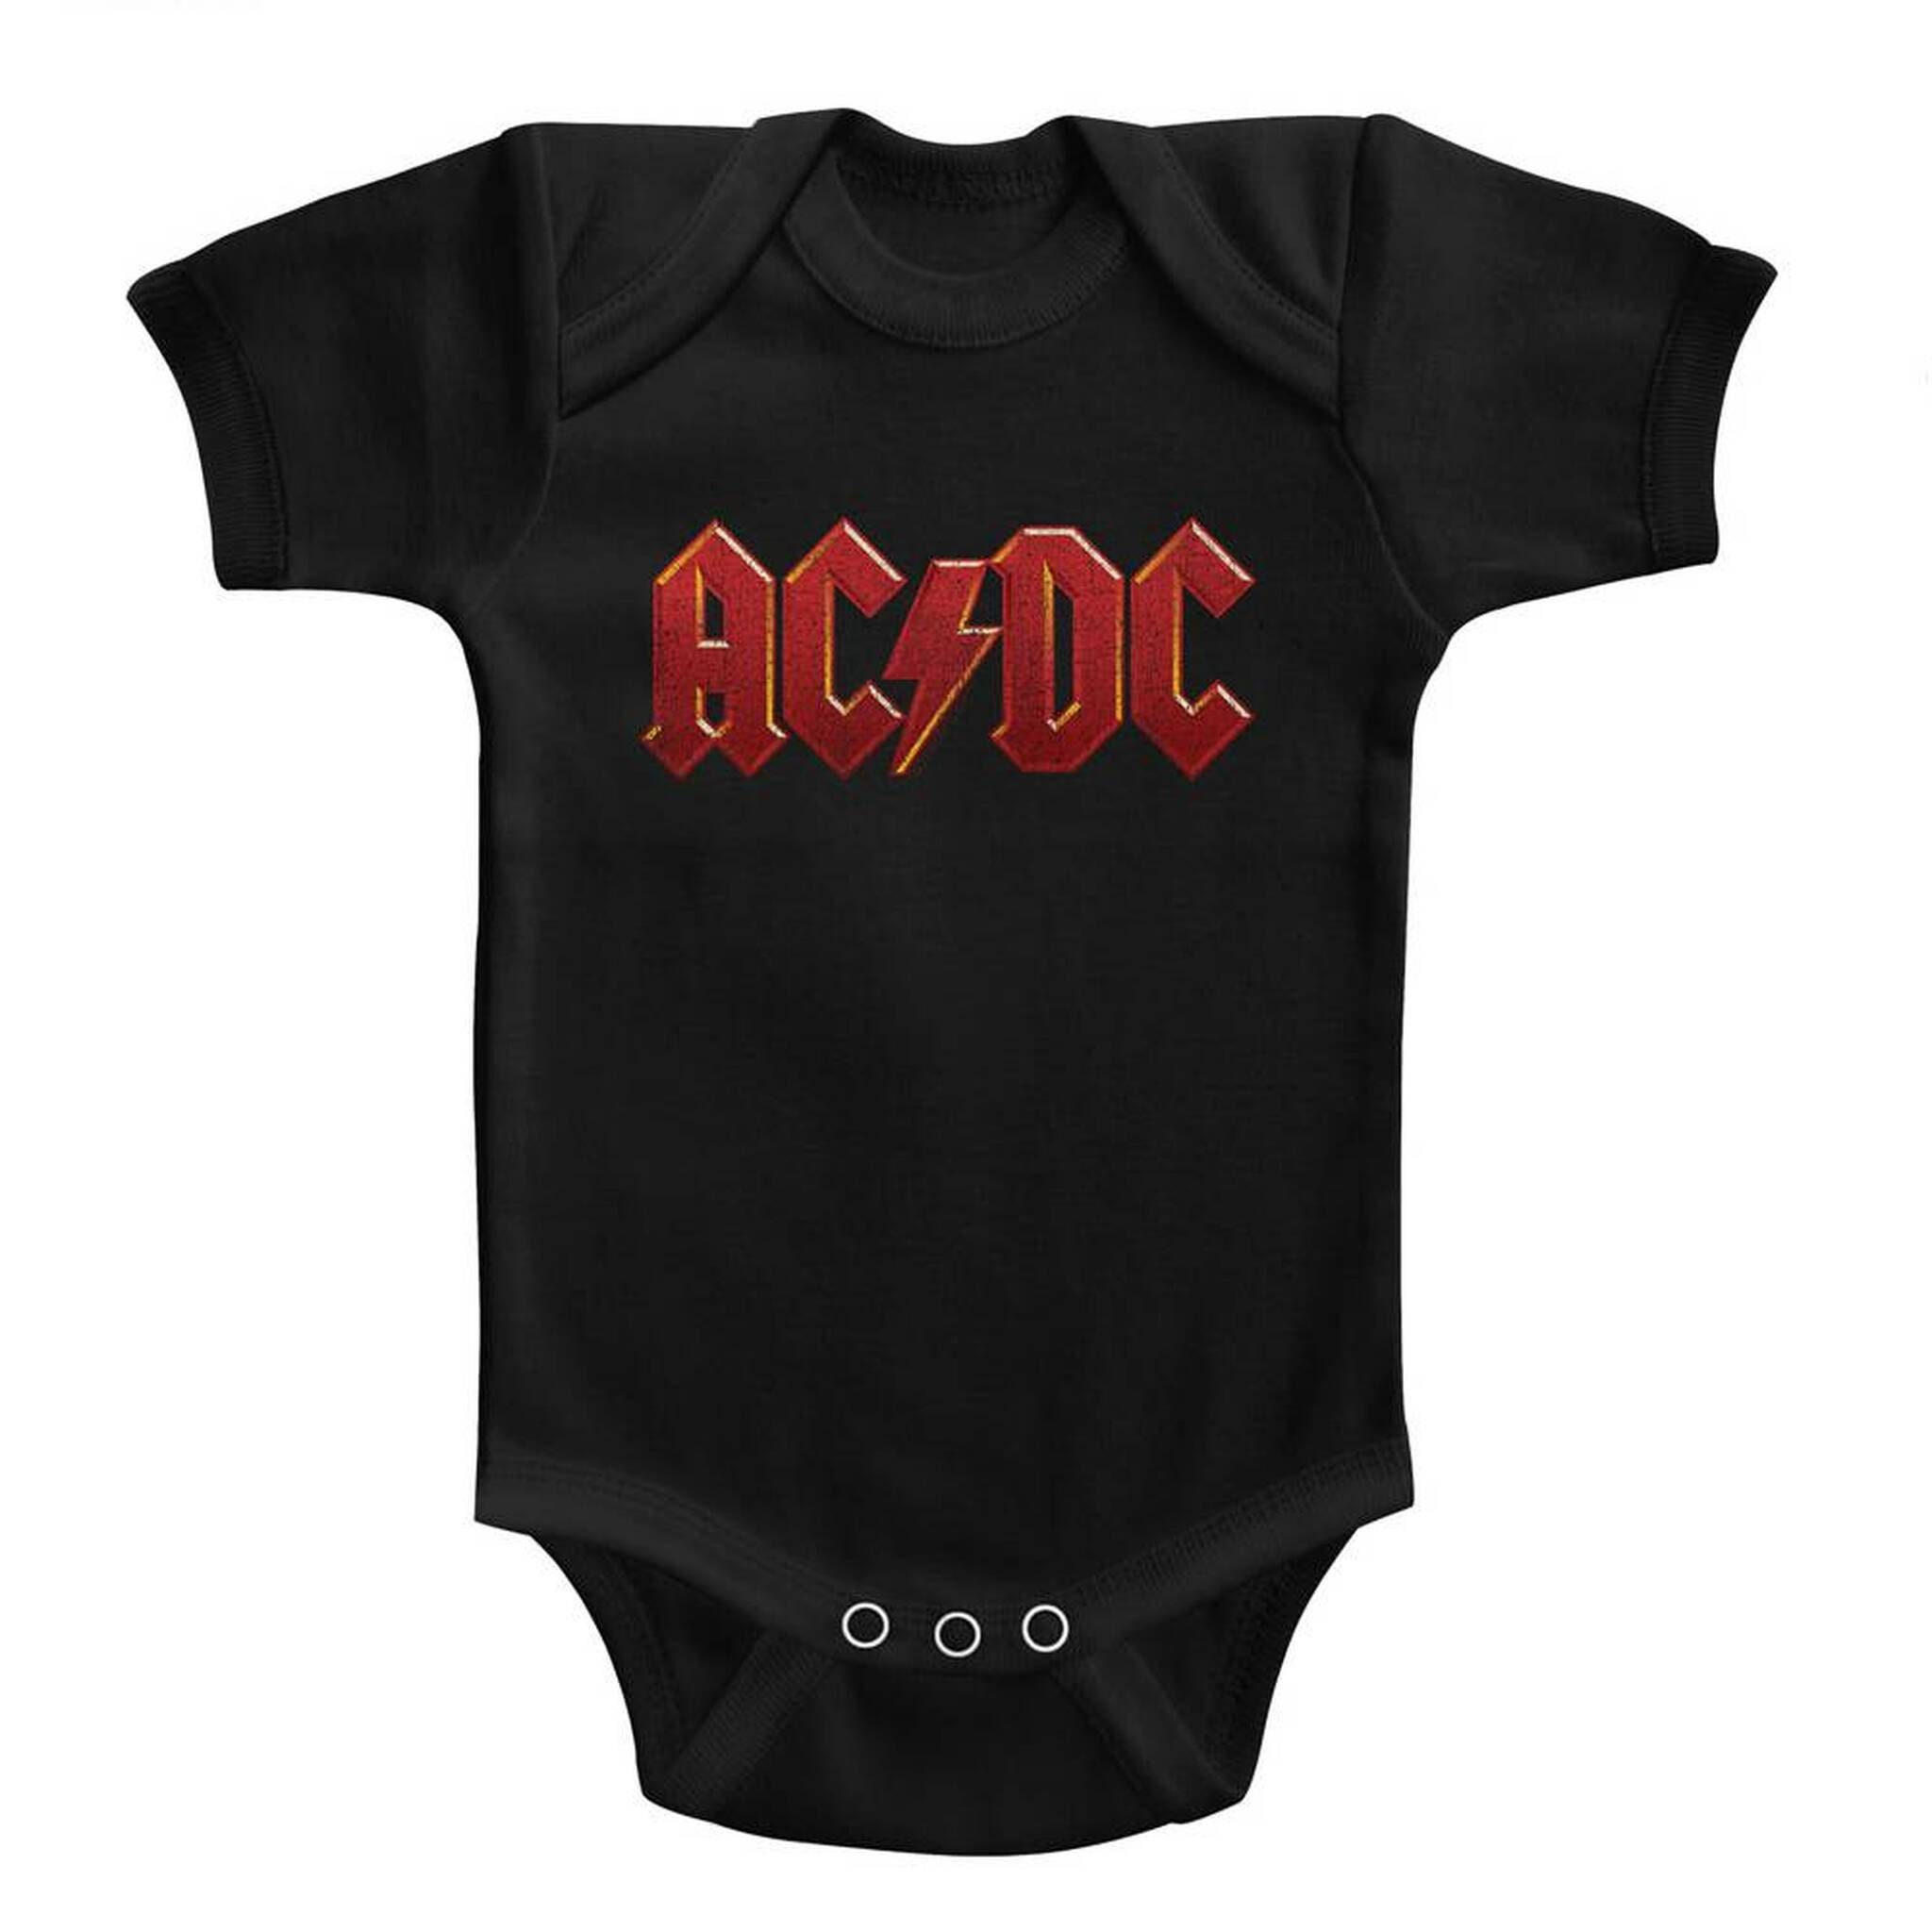 AC/DC Distressed Red Black Infant Baby Onesie T-Shirt